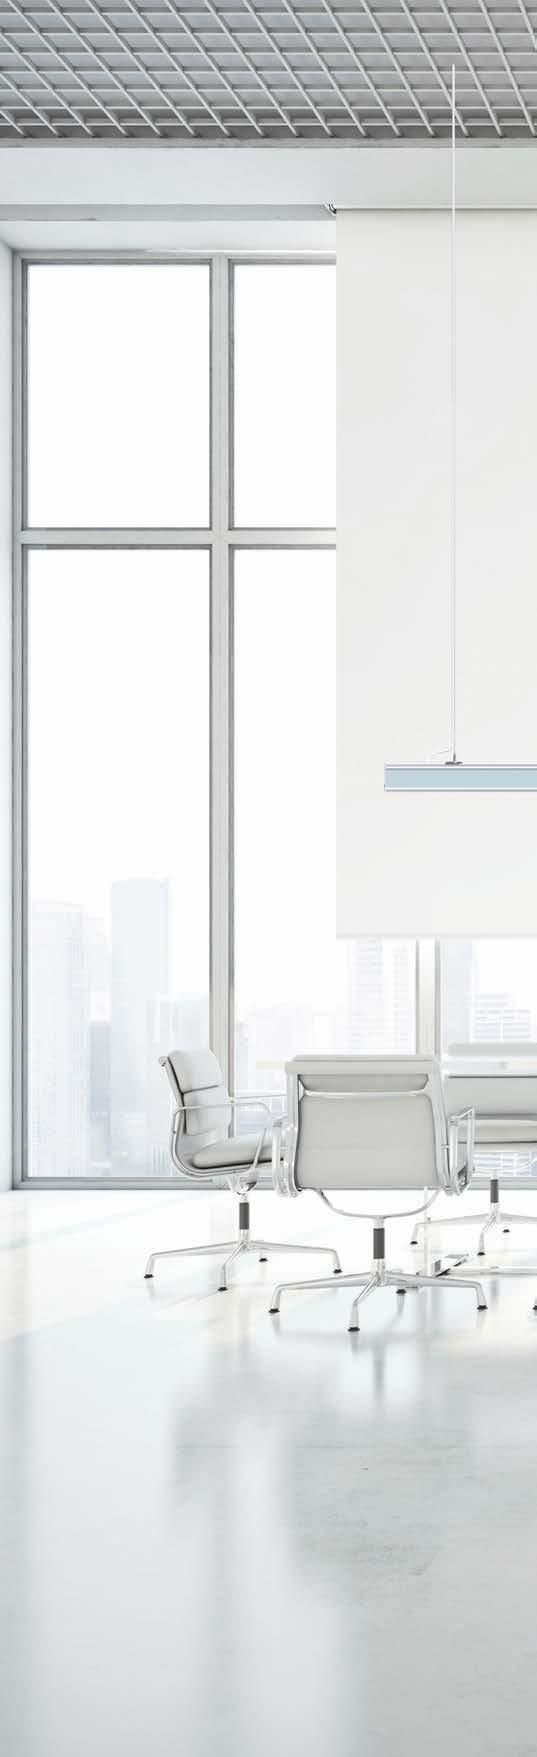 Brighter ighting With intelligent sensors, Aura ight takes lighting control to the next level.